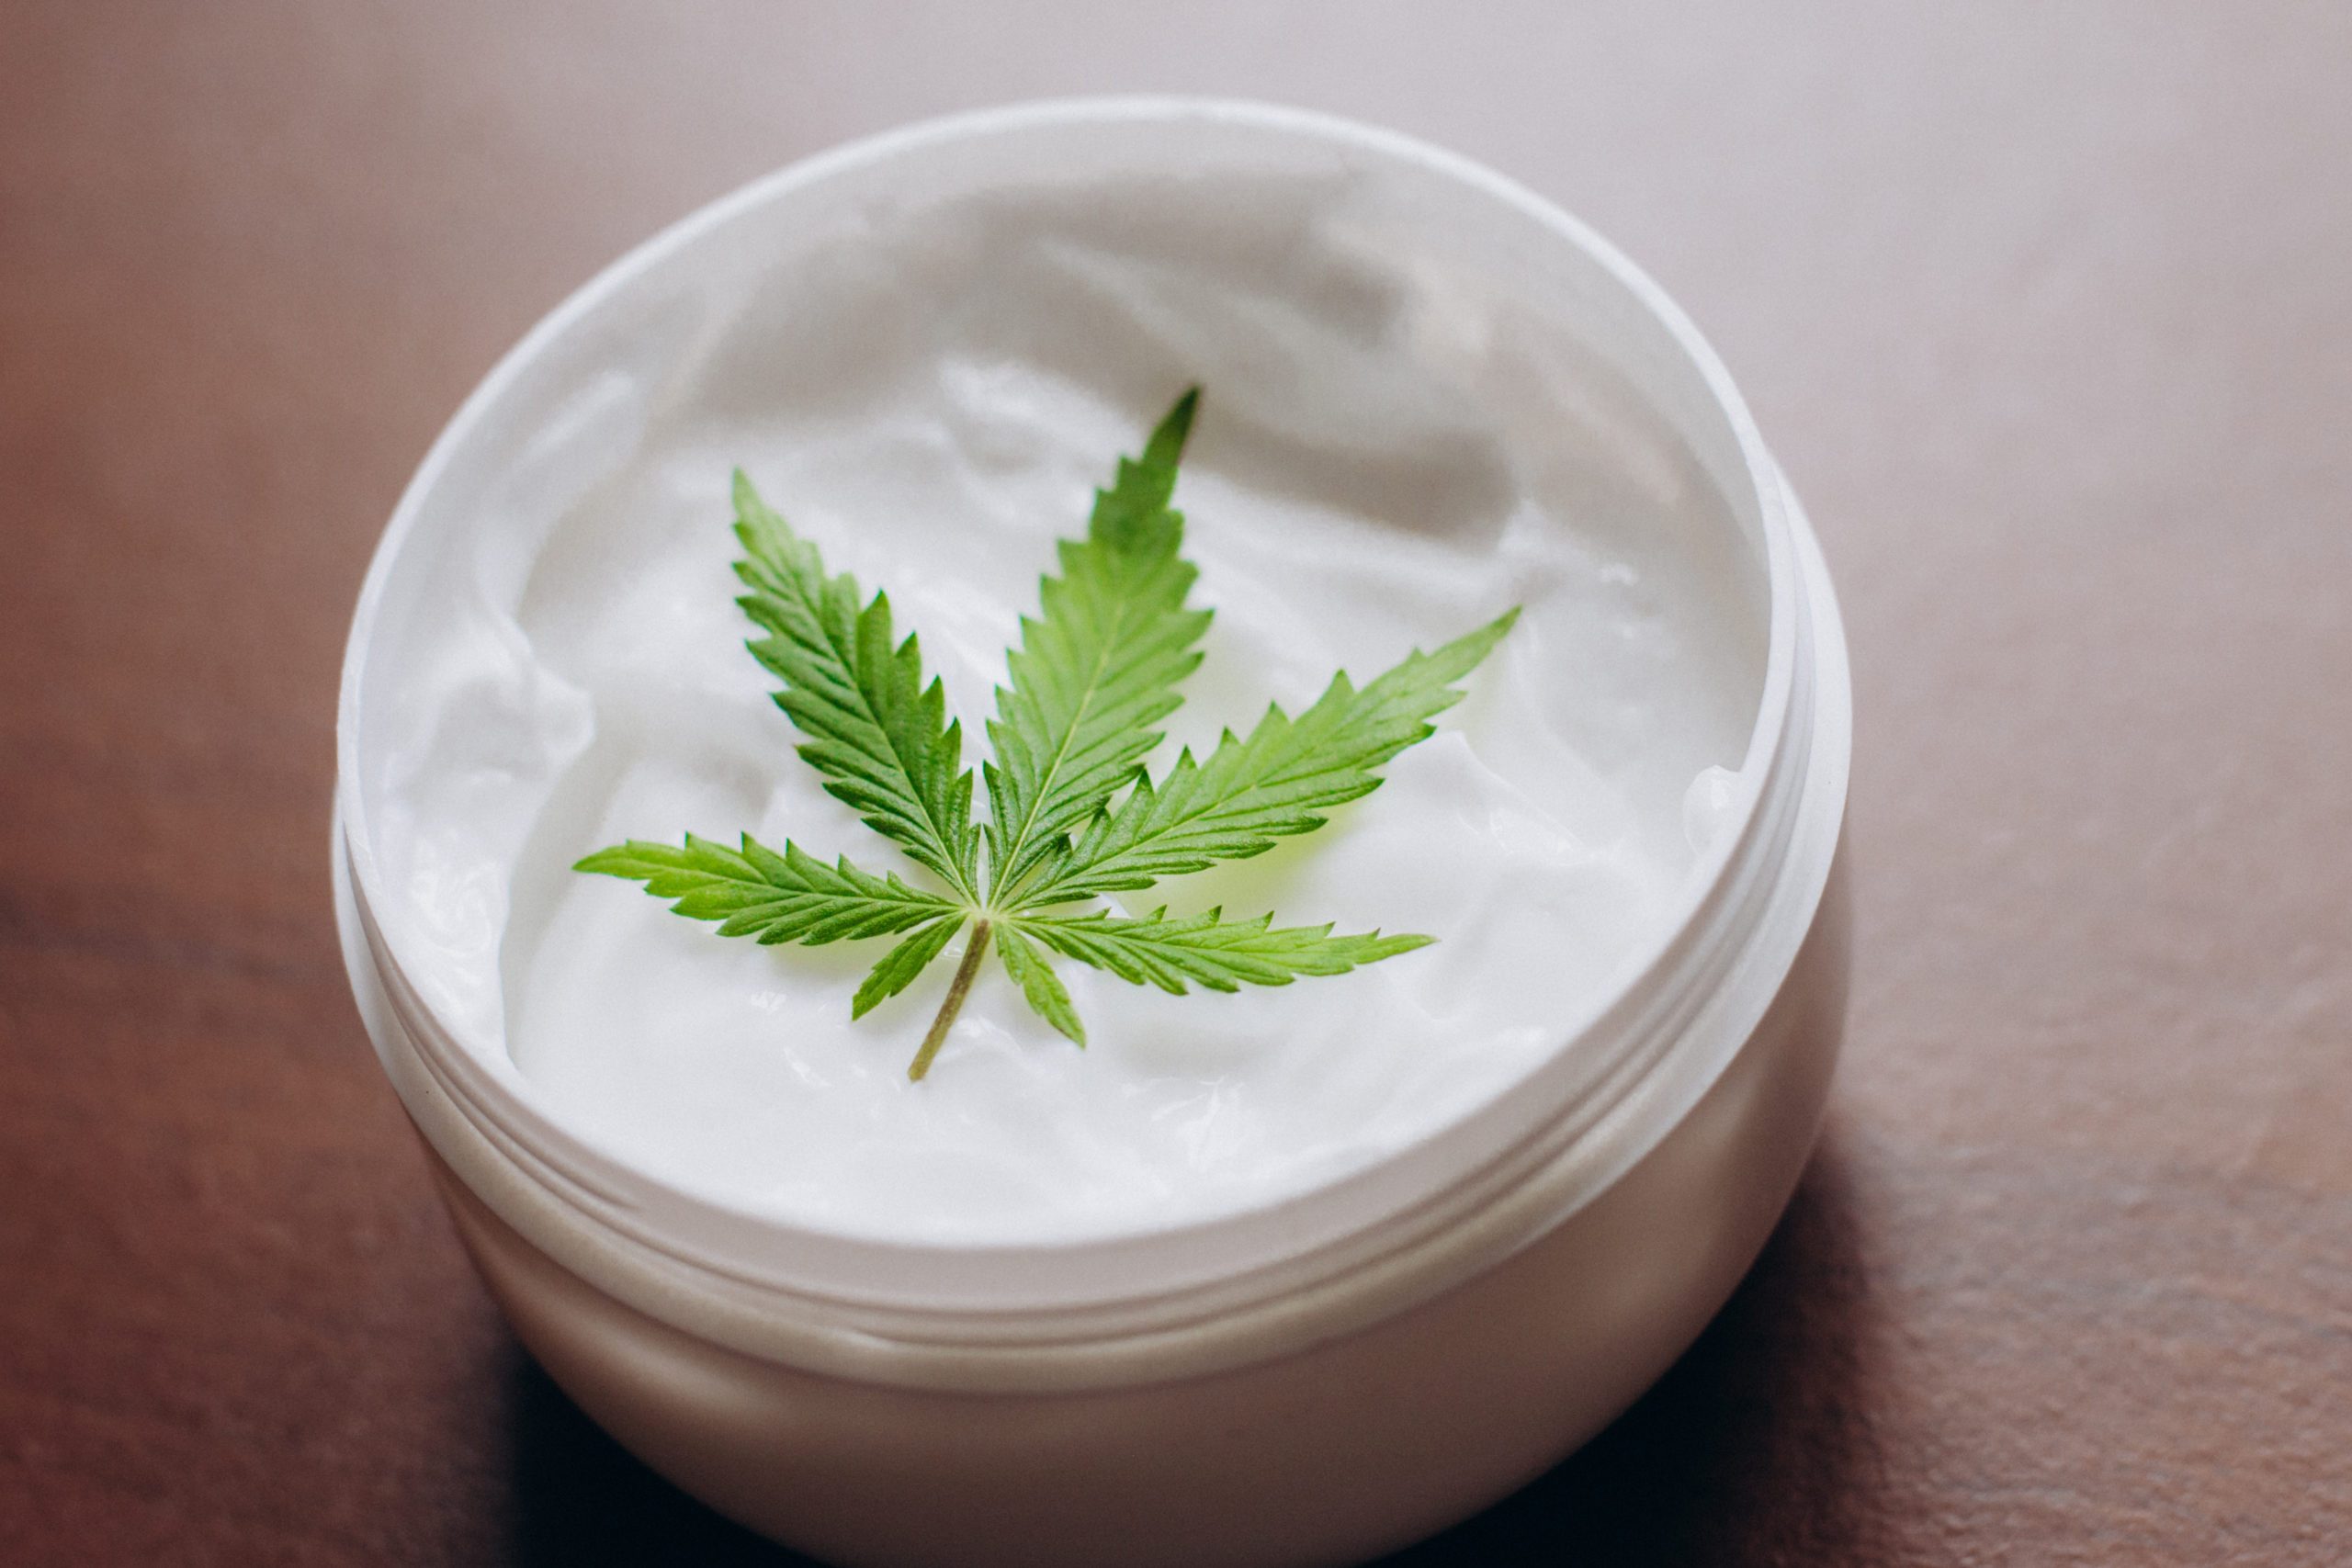 Cosmetic cream made of natural cannabis, hemp, moisturizing lotion with CBD content. Copy space for your design use,text